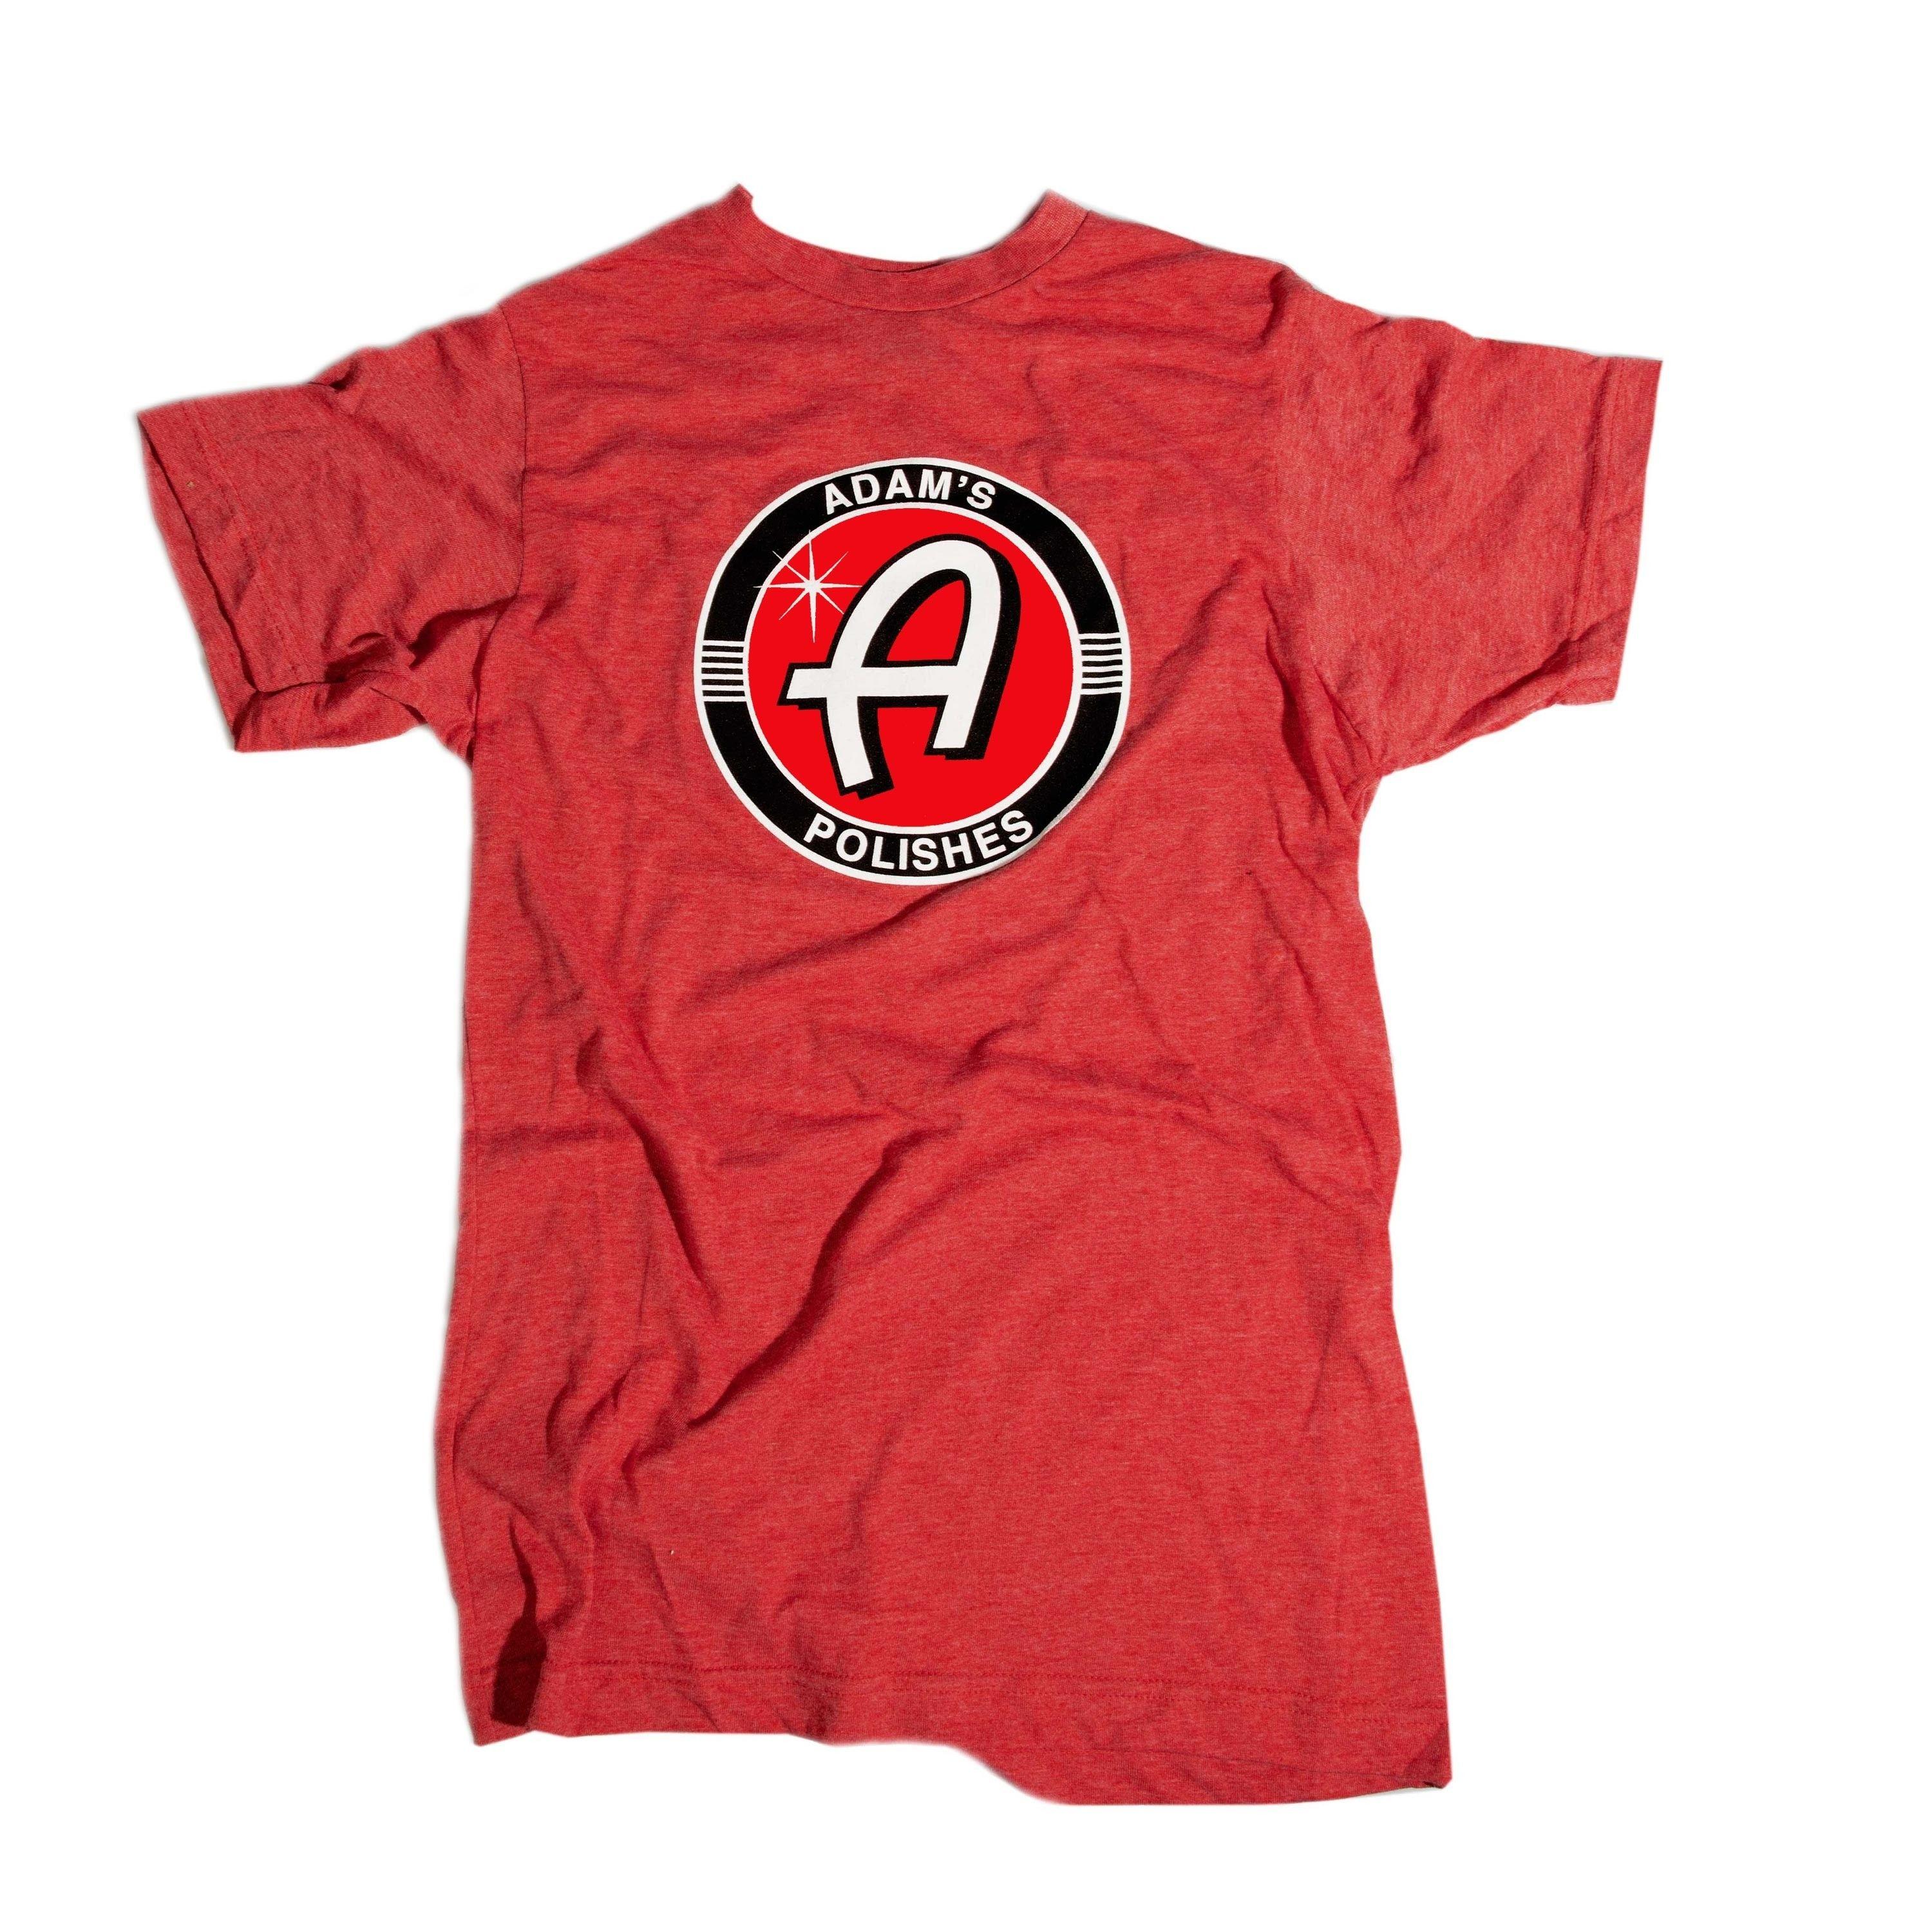 Red Clothing and Apparel Logo - Adam's Red Shirt with Classic Logo. Adam's Polishes Apparel